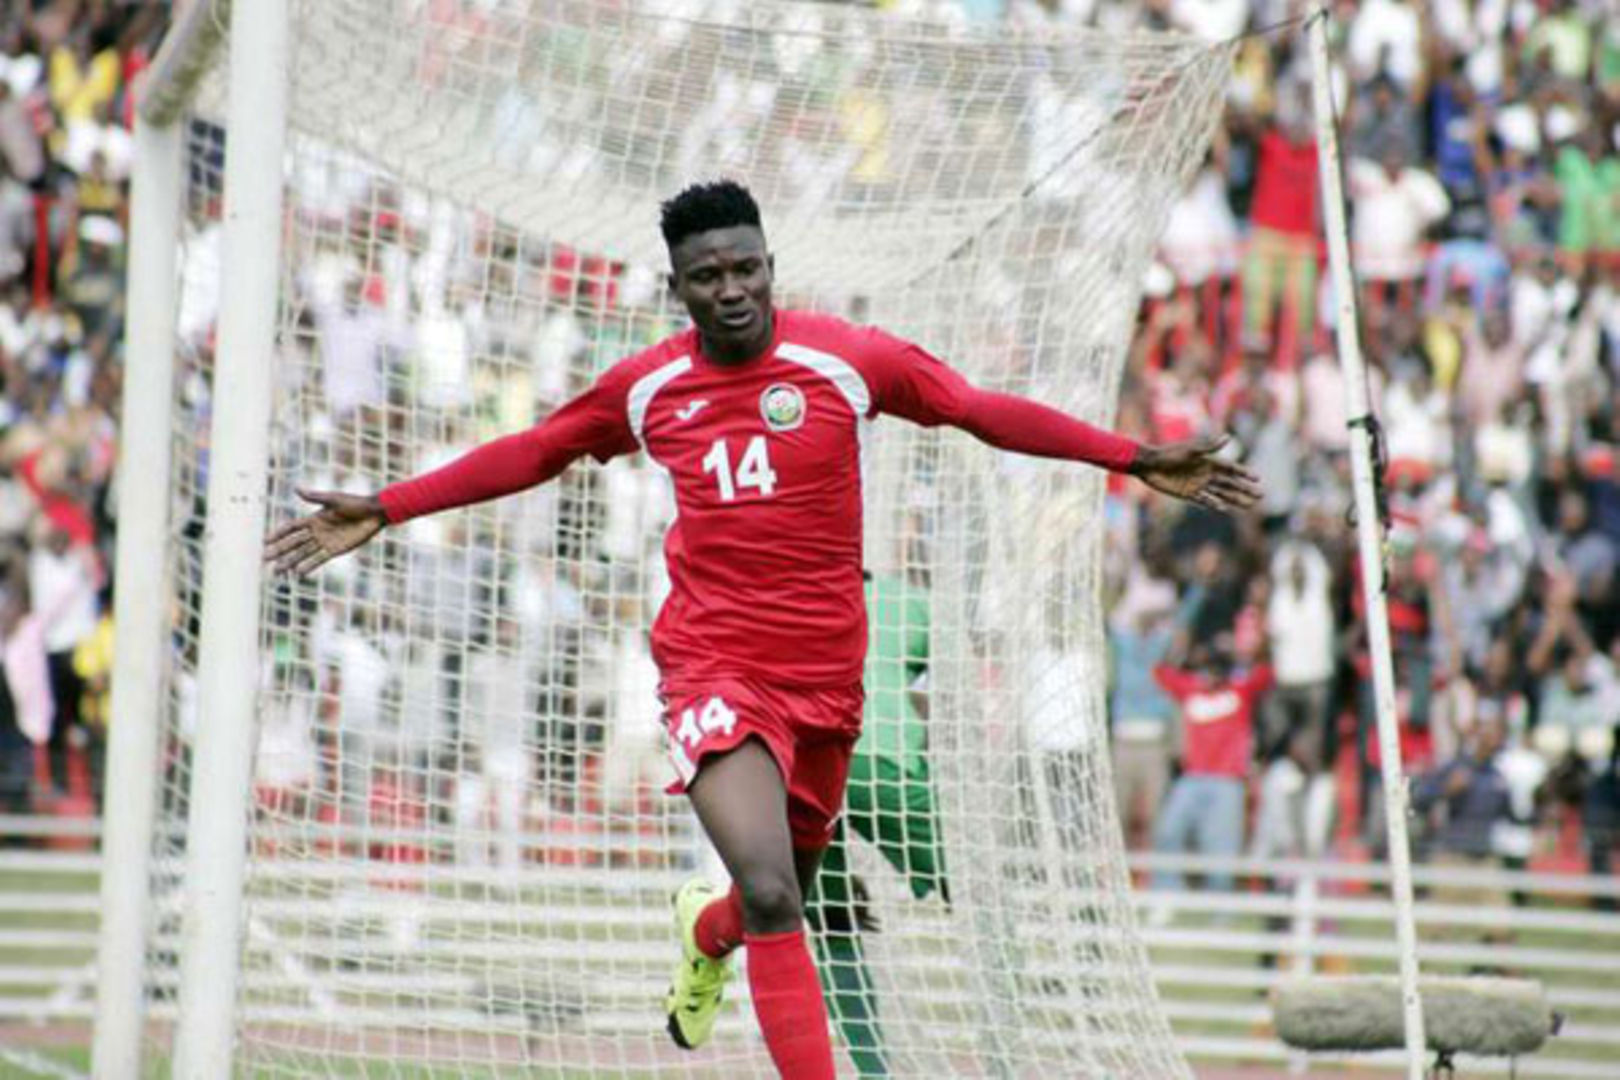 World Cup Qualifiers: Where did it go wrong for 'optimistic' Harambee Stars?